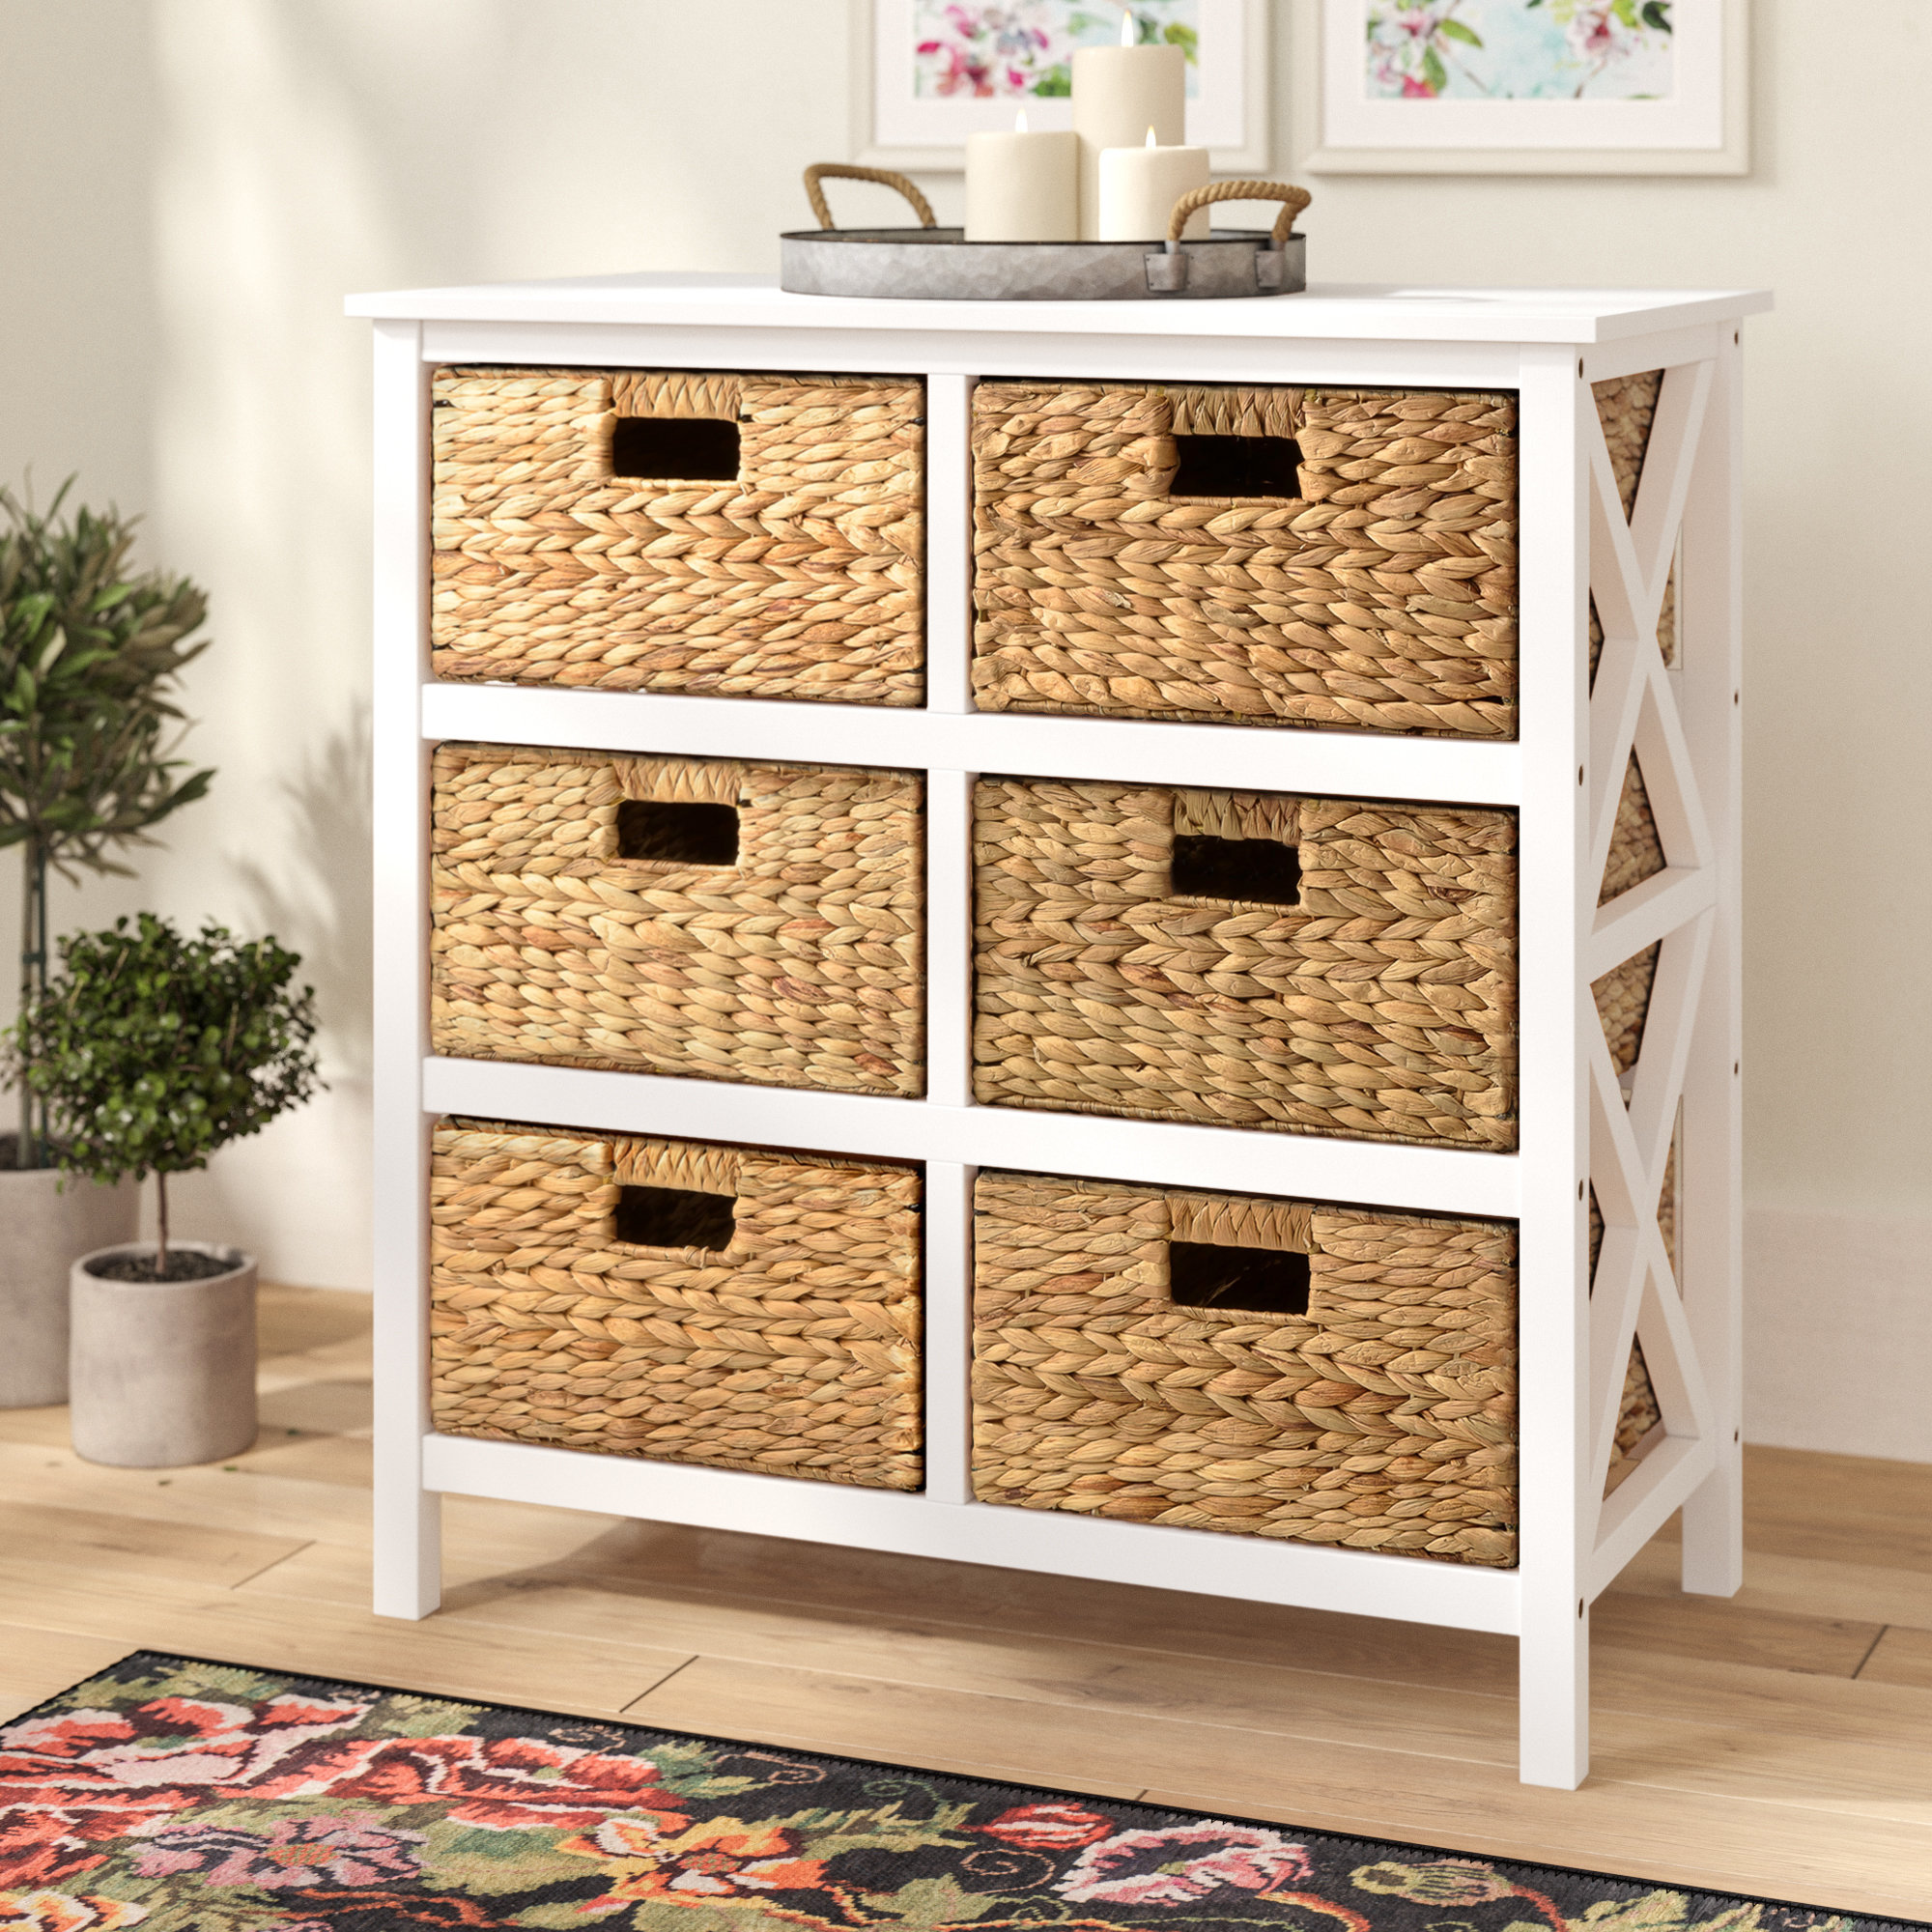 August Grove Schimpl 3 Tier X Side 6 Drawer Accent Chest Reviews